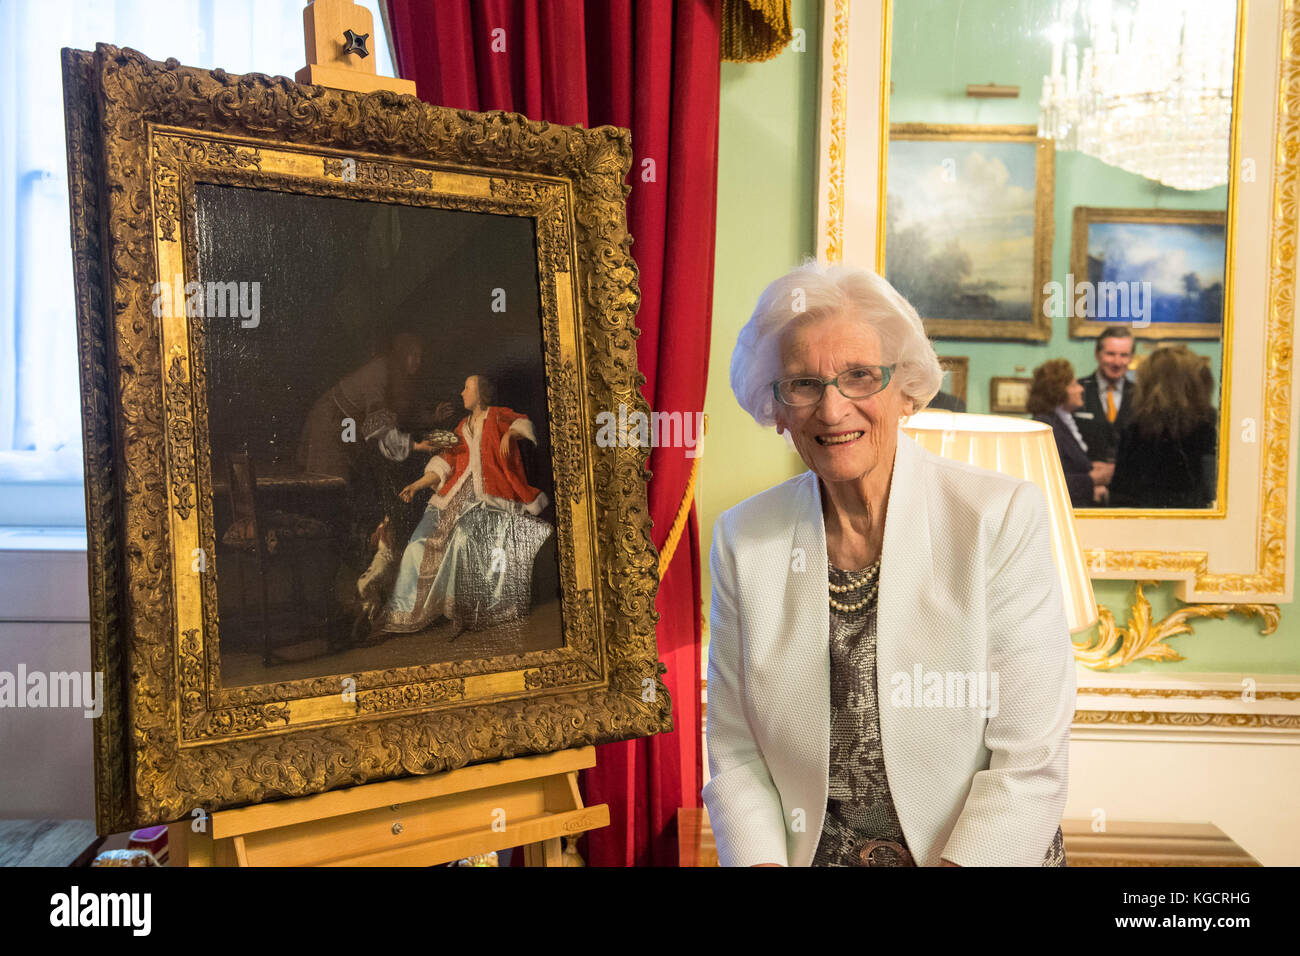 Charlotte Bischoff van Heemskerck with the seventeenth-century Dutch painting 'The Oyster Meal' by Jacob Ochtervelt, which was looted during WWII and has now been returned to her by the City of London at a ceremony at the Mansion House, London. Stock Photo